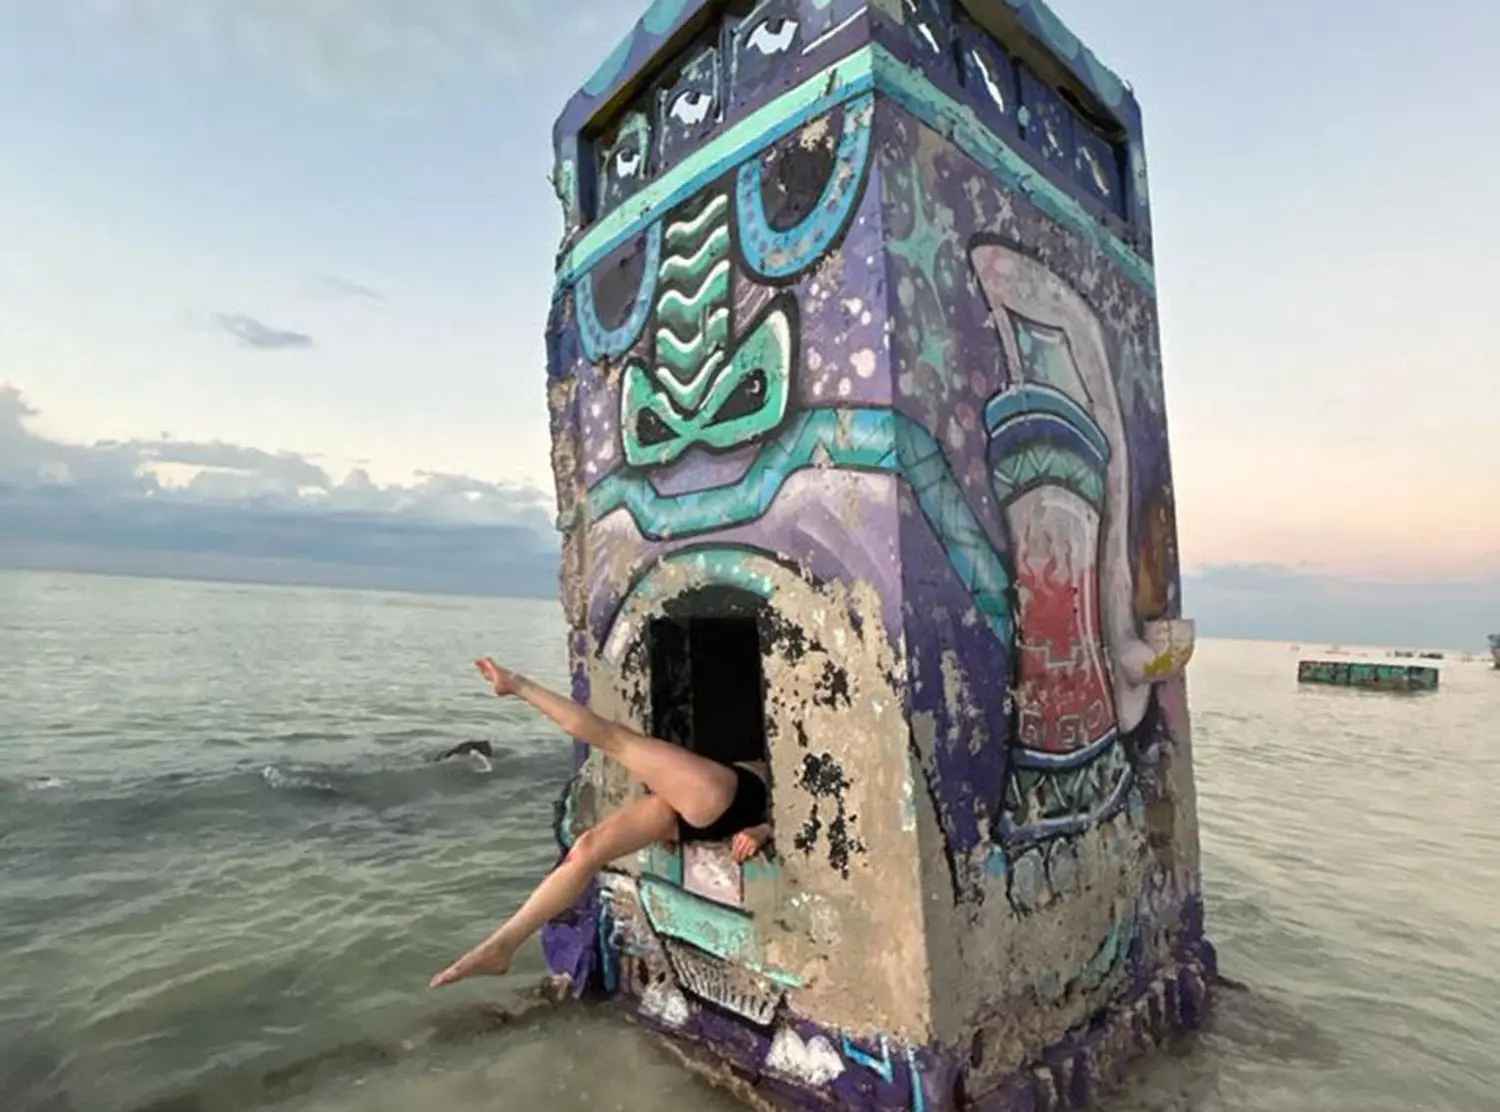 Nômade Holbox The beach is dotted with what I consider to be miniature works of art — derelict toilets that have been beautifully graffitied